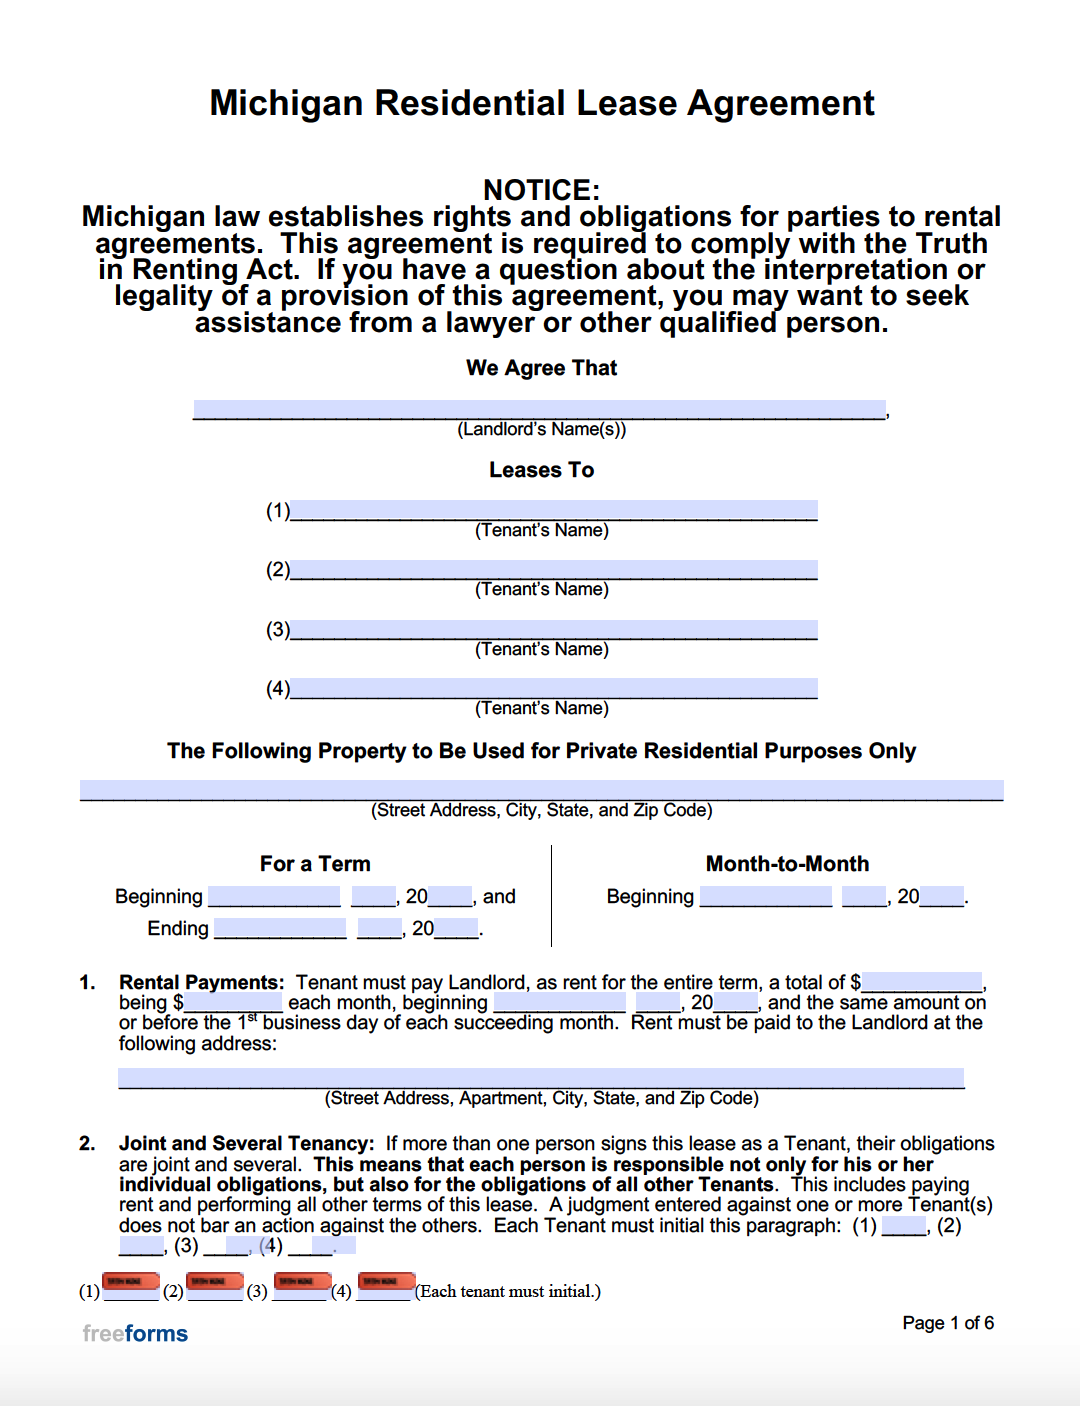 standard-michigan-residential-lease-agreement-printable-form